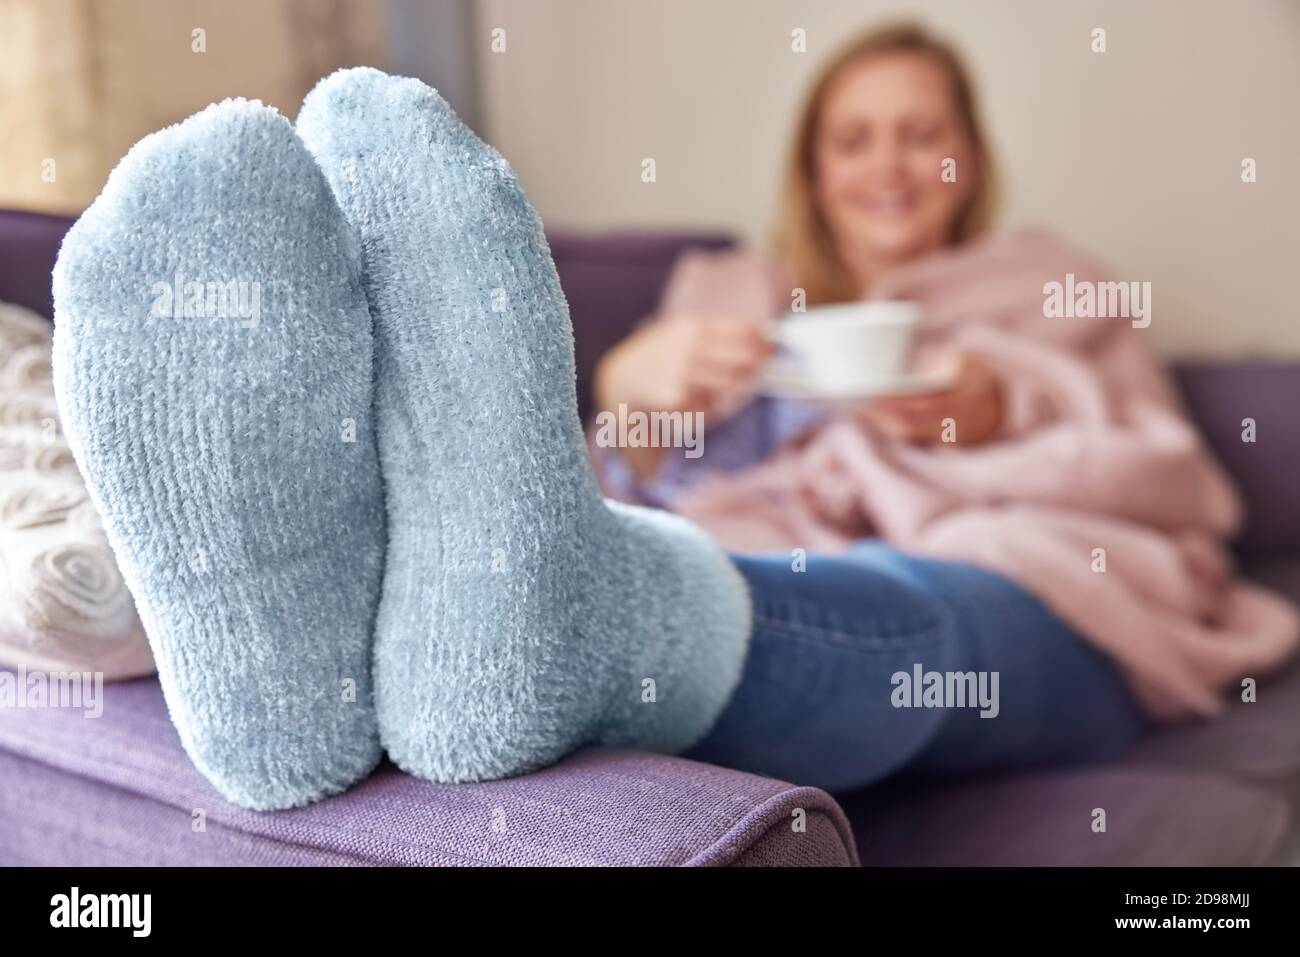 Woman At Home Wearing Cosy Warm Socks And Wrapped In Blanket Lying On Sofa Drinking Cup Of Tea Stock Photo